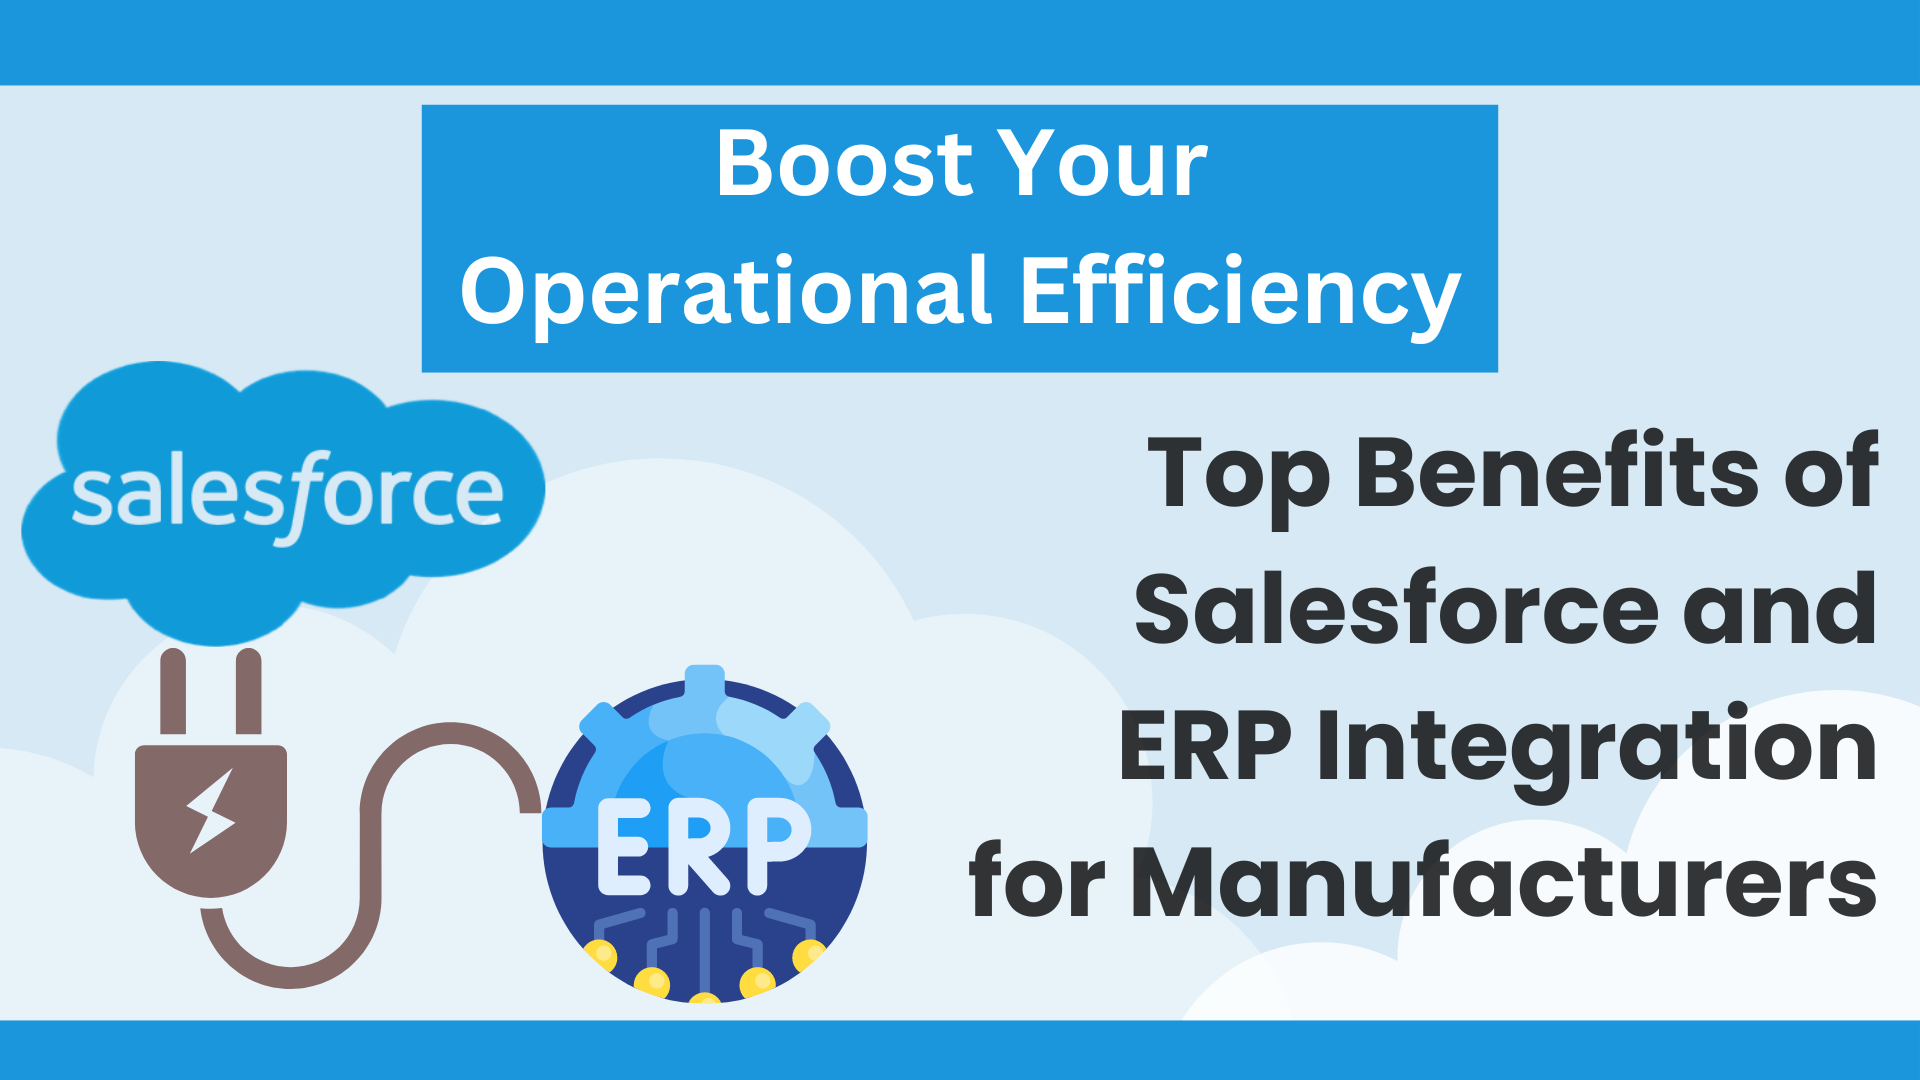 Top Benefits of Salesforce and ERP Integration for Manufacturers